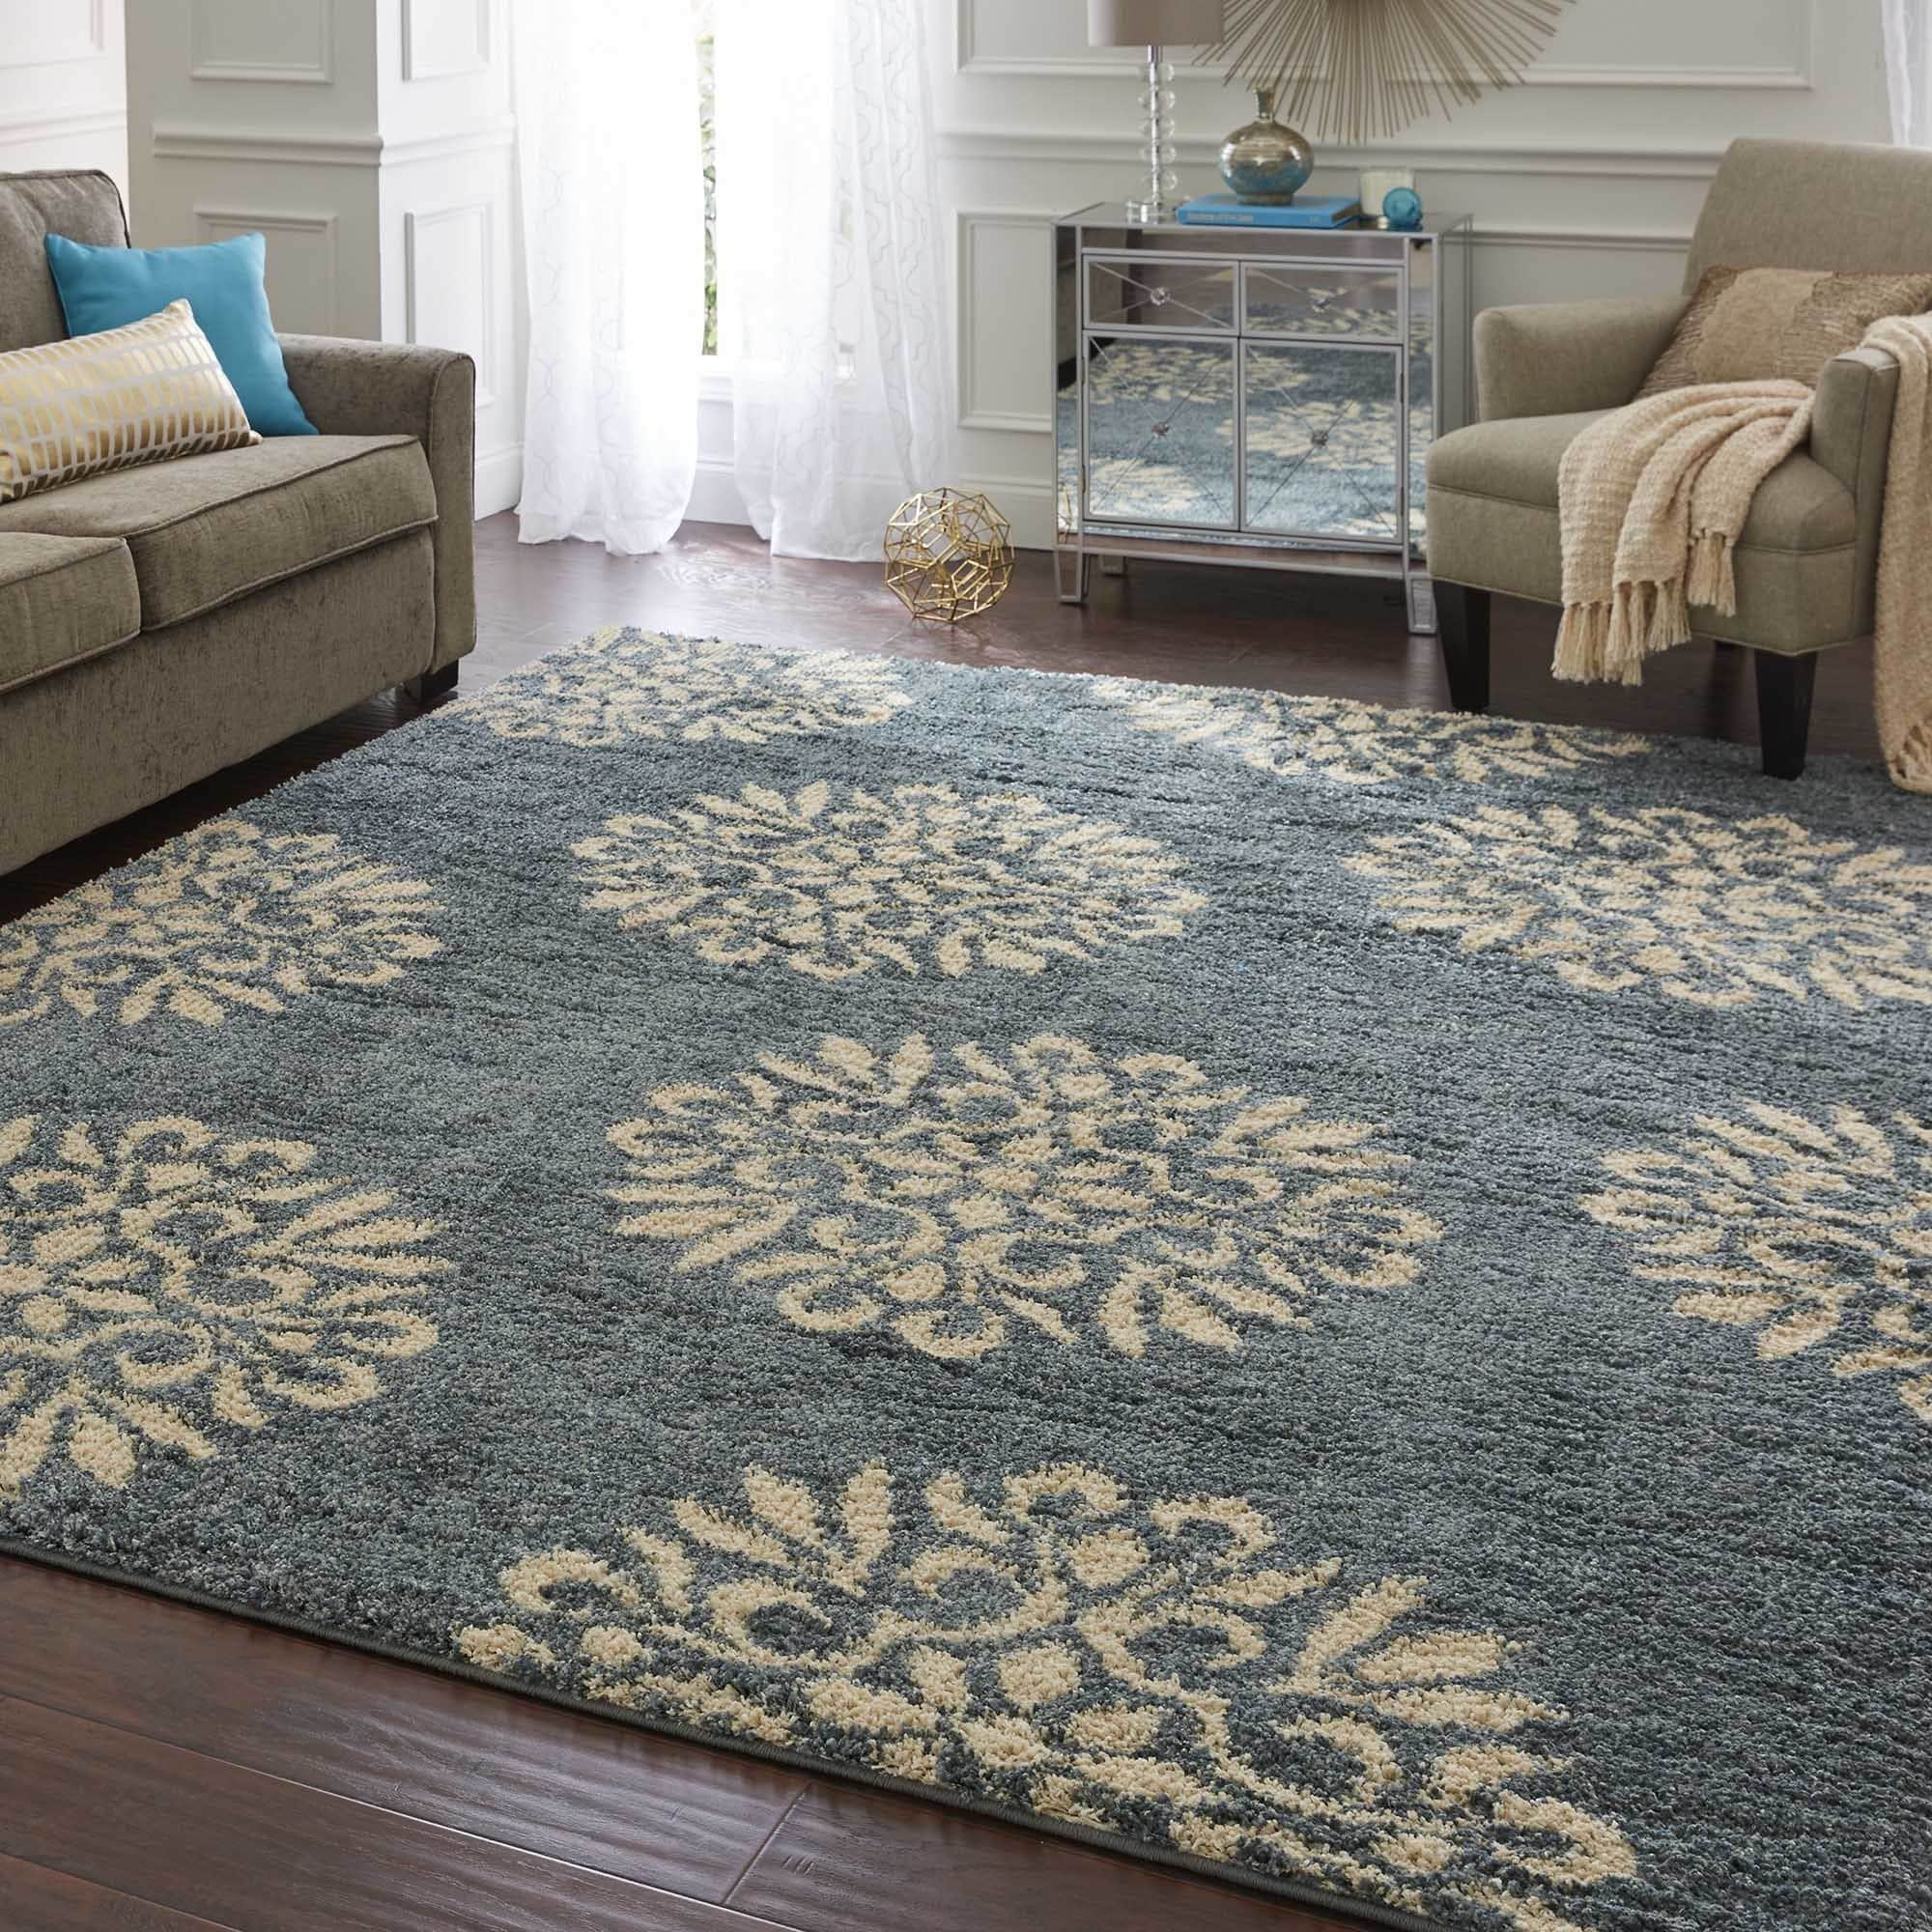 Woven Exploded Medallions Bay Blue Rug (8 X 10)